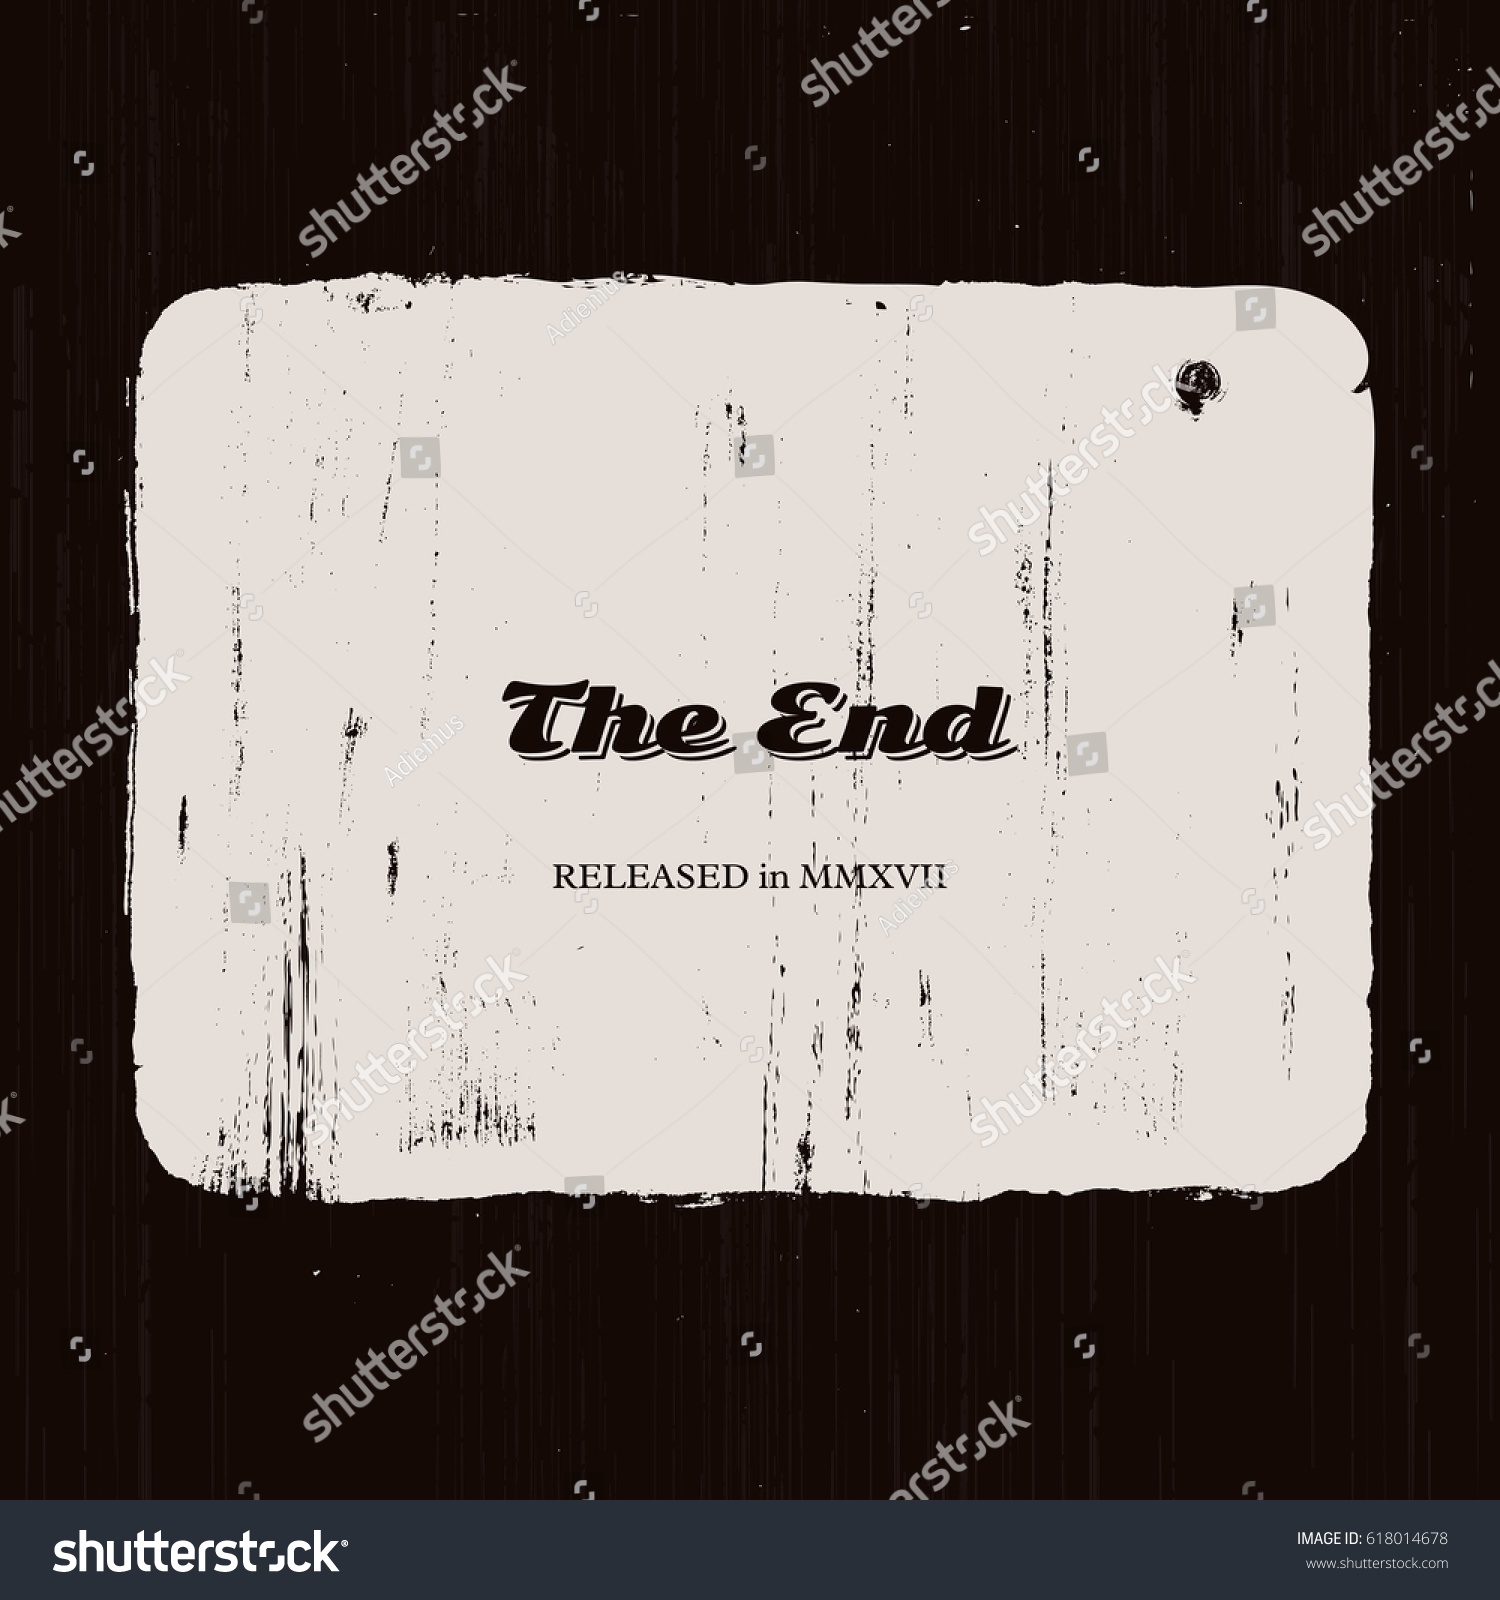 Grunge Textured Frame Stylized Old Cinema Stock Vector 618014678 ...